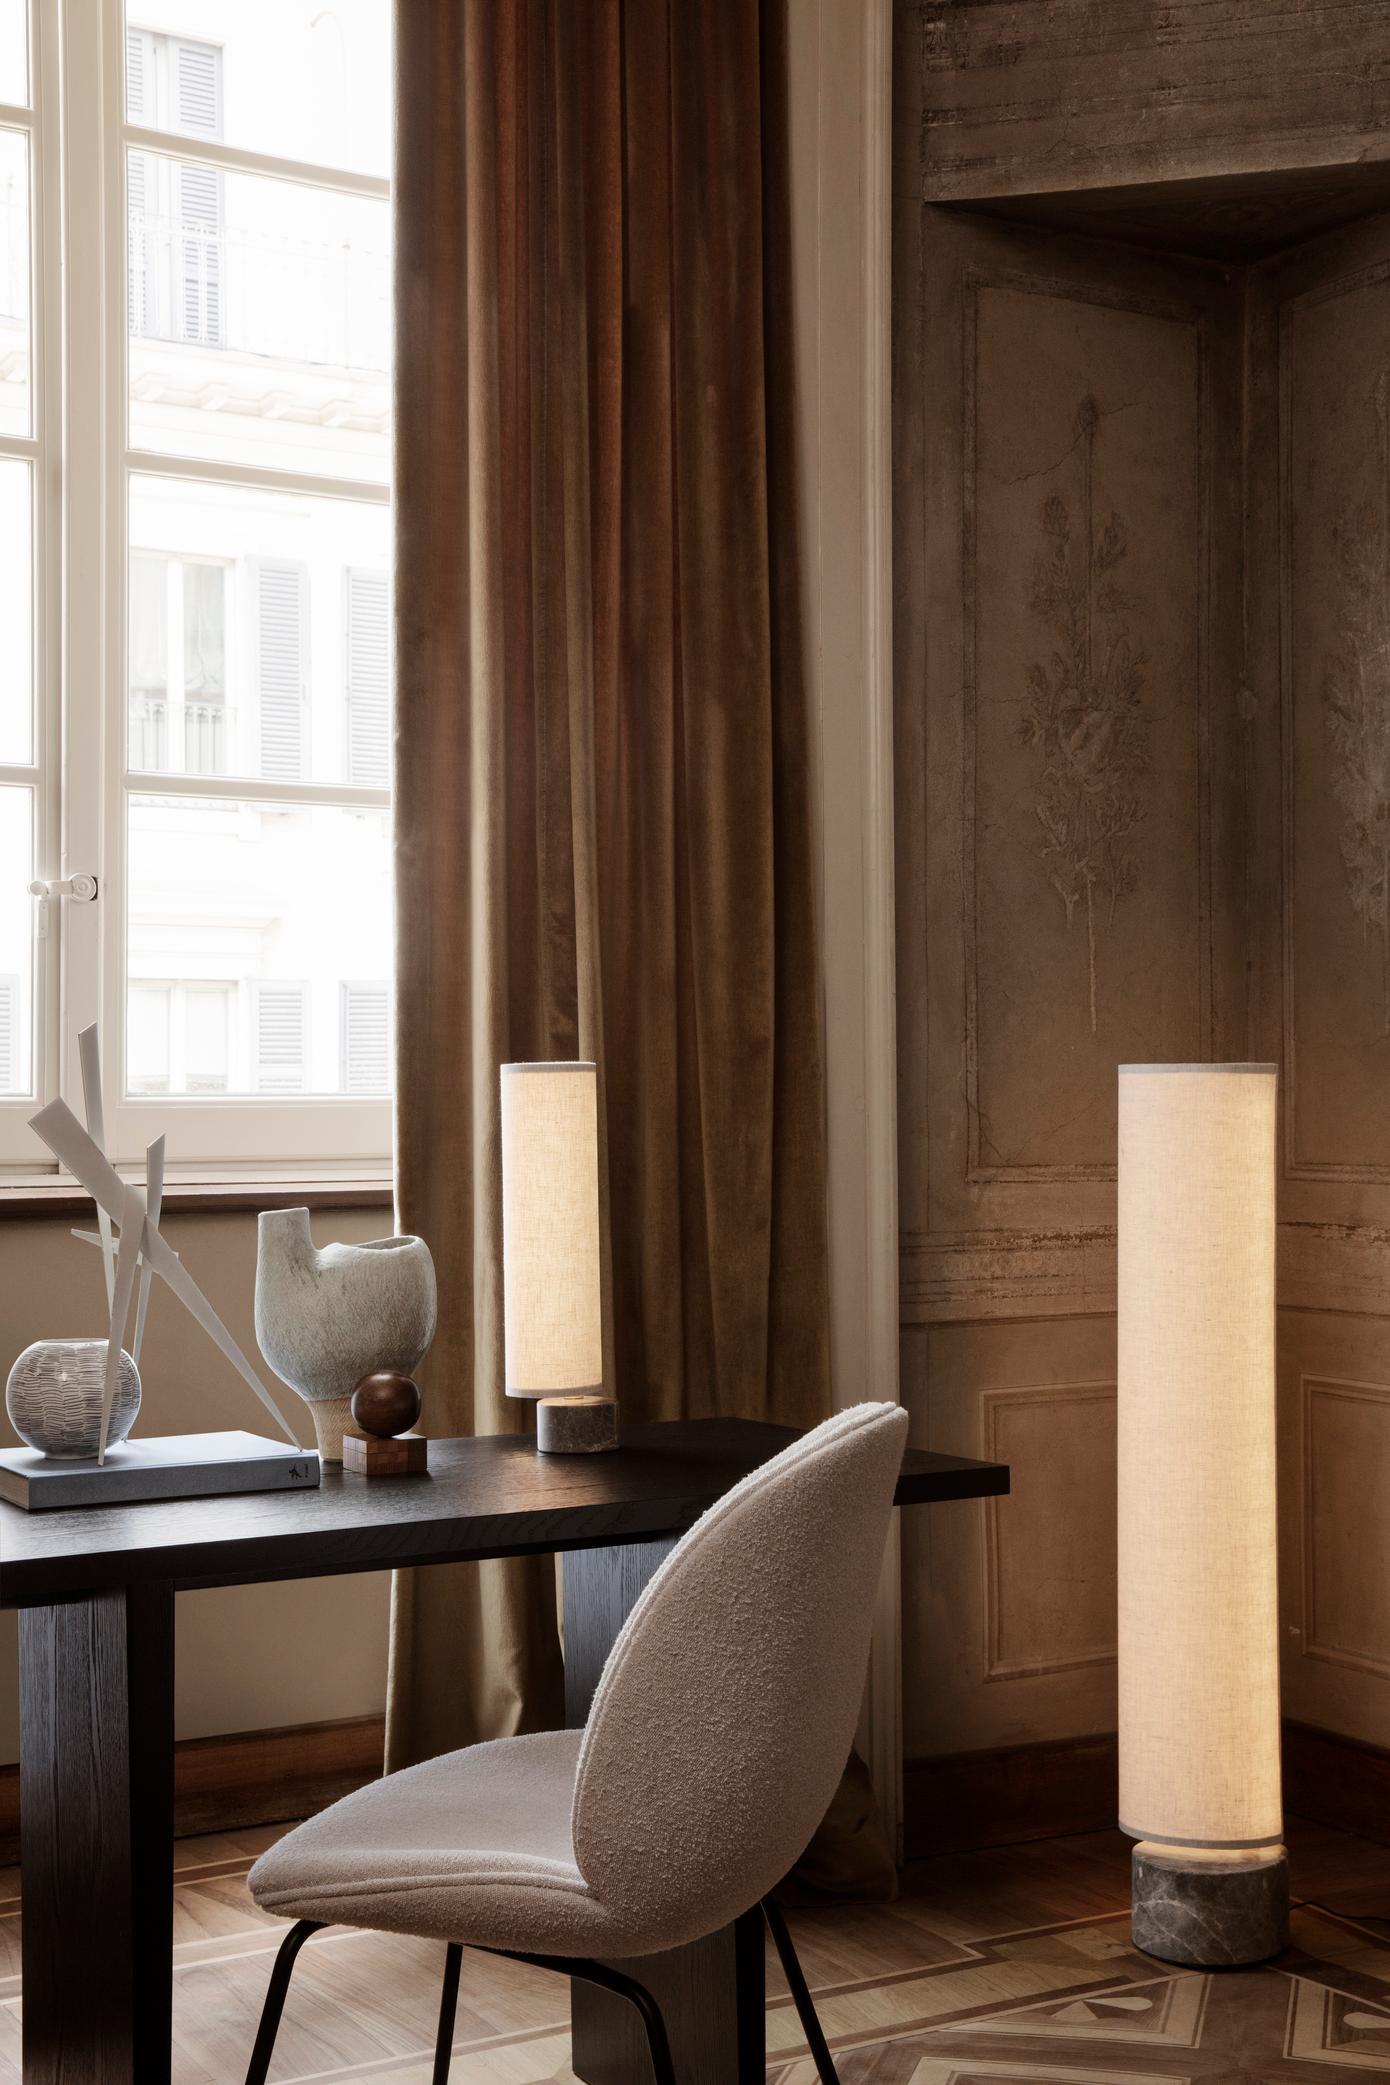 Brass 'Unbound' Table Lamp by Space Copenhagen for GUBI with White Linen Shade For Sale